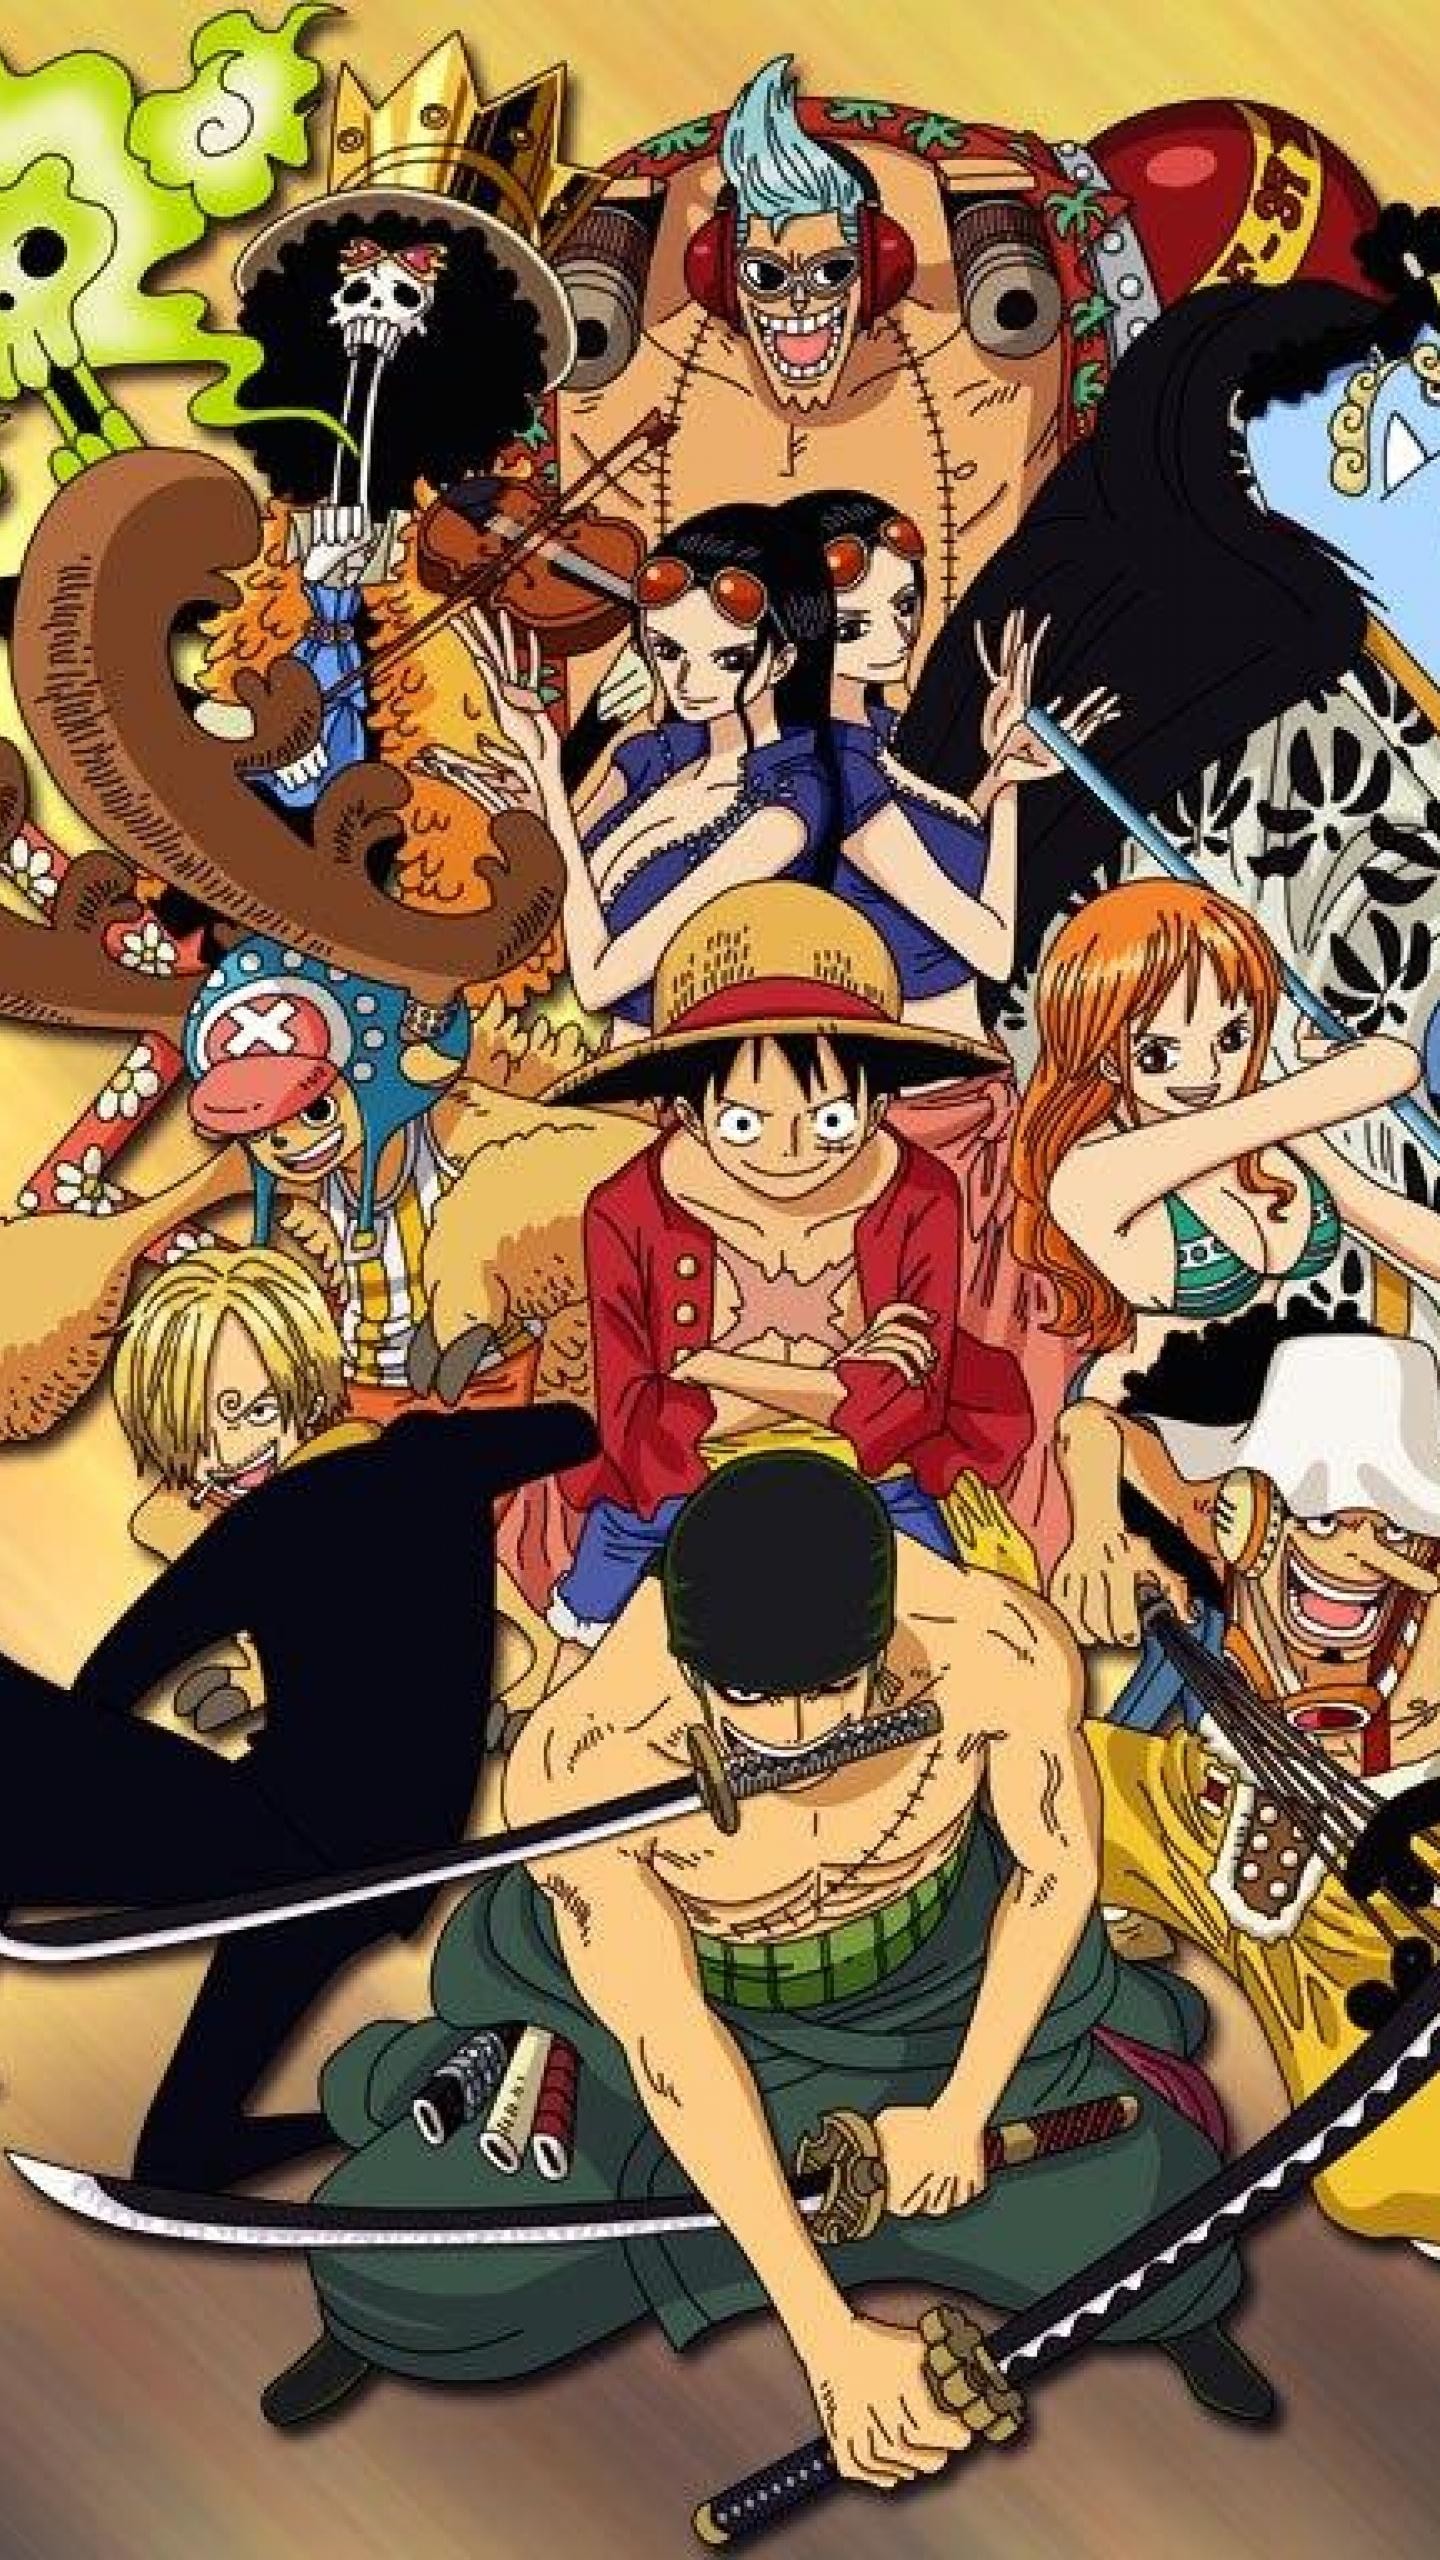 One Piece Hd Wallpapers